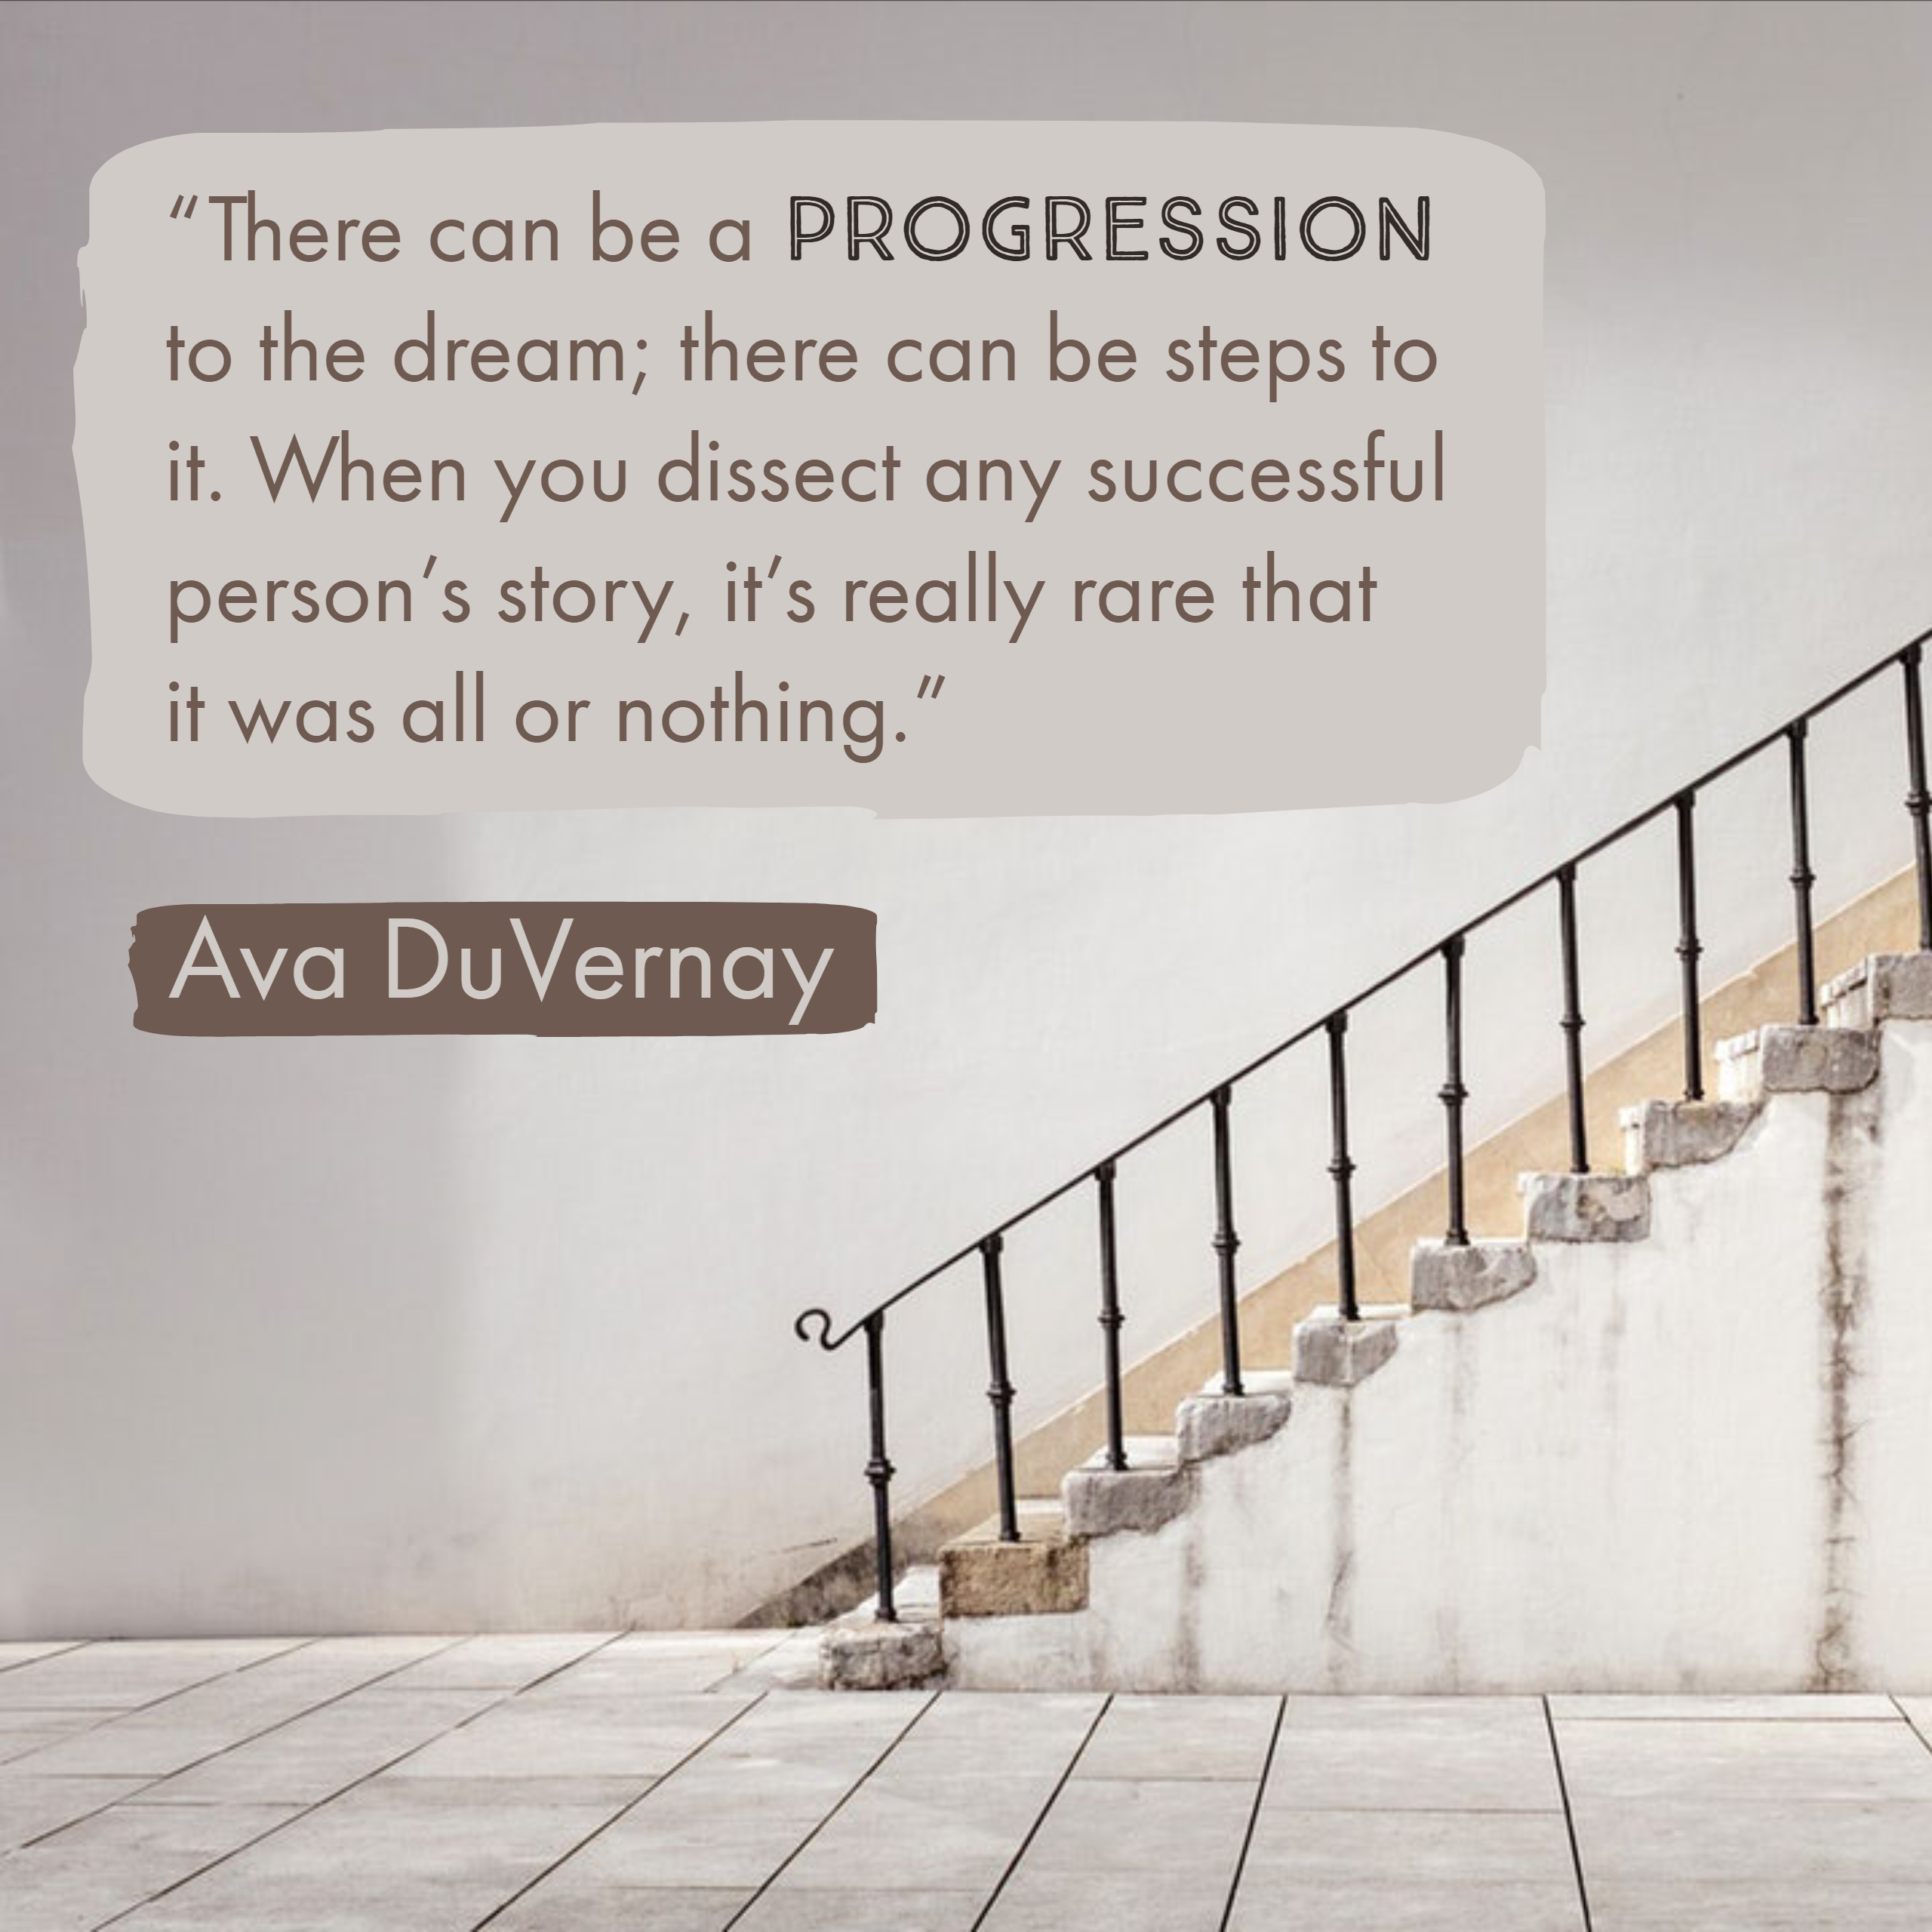 There can be a progression to the dream; there can be steps to it. When you dissect any successful person's story, it's really rare that it was all of nothing.